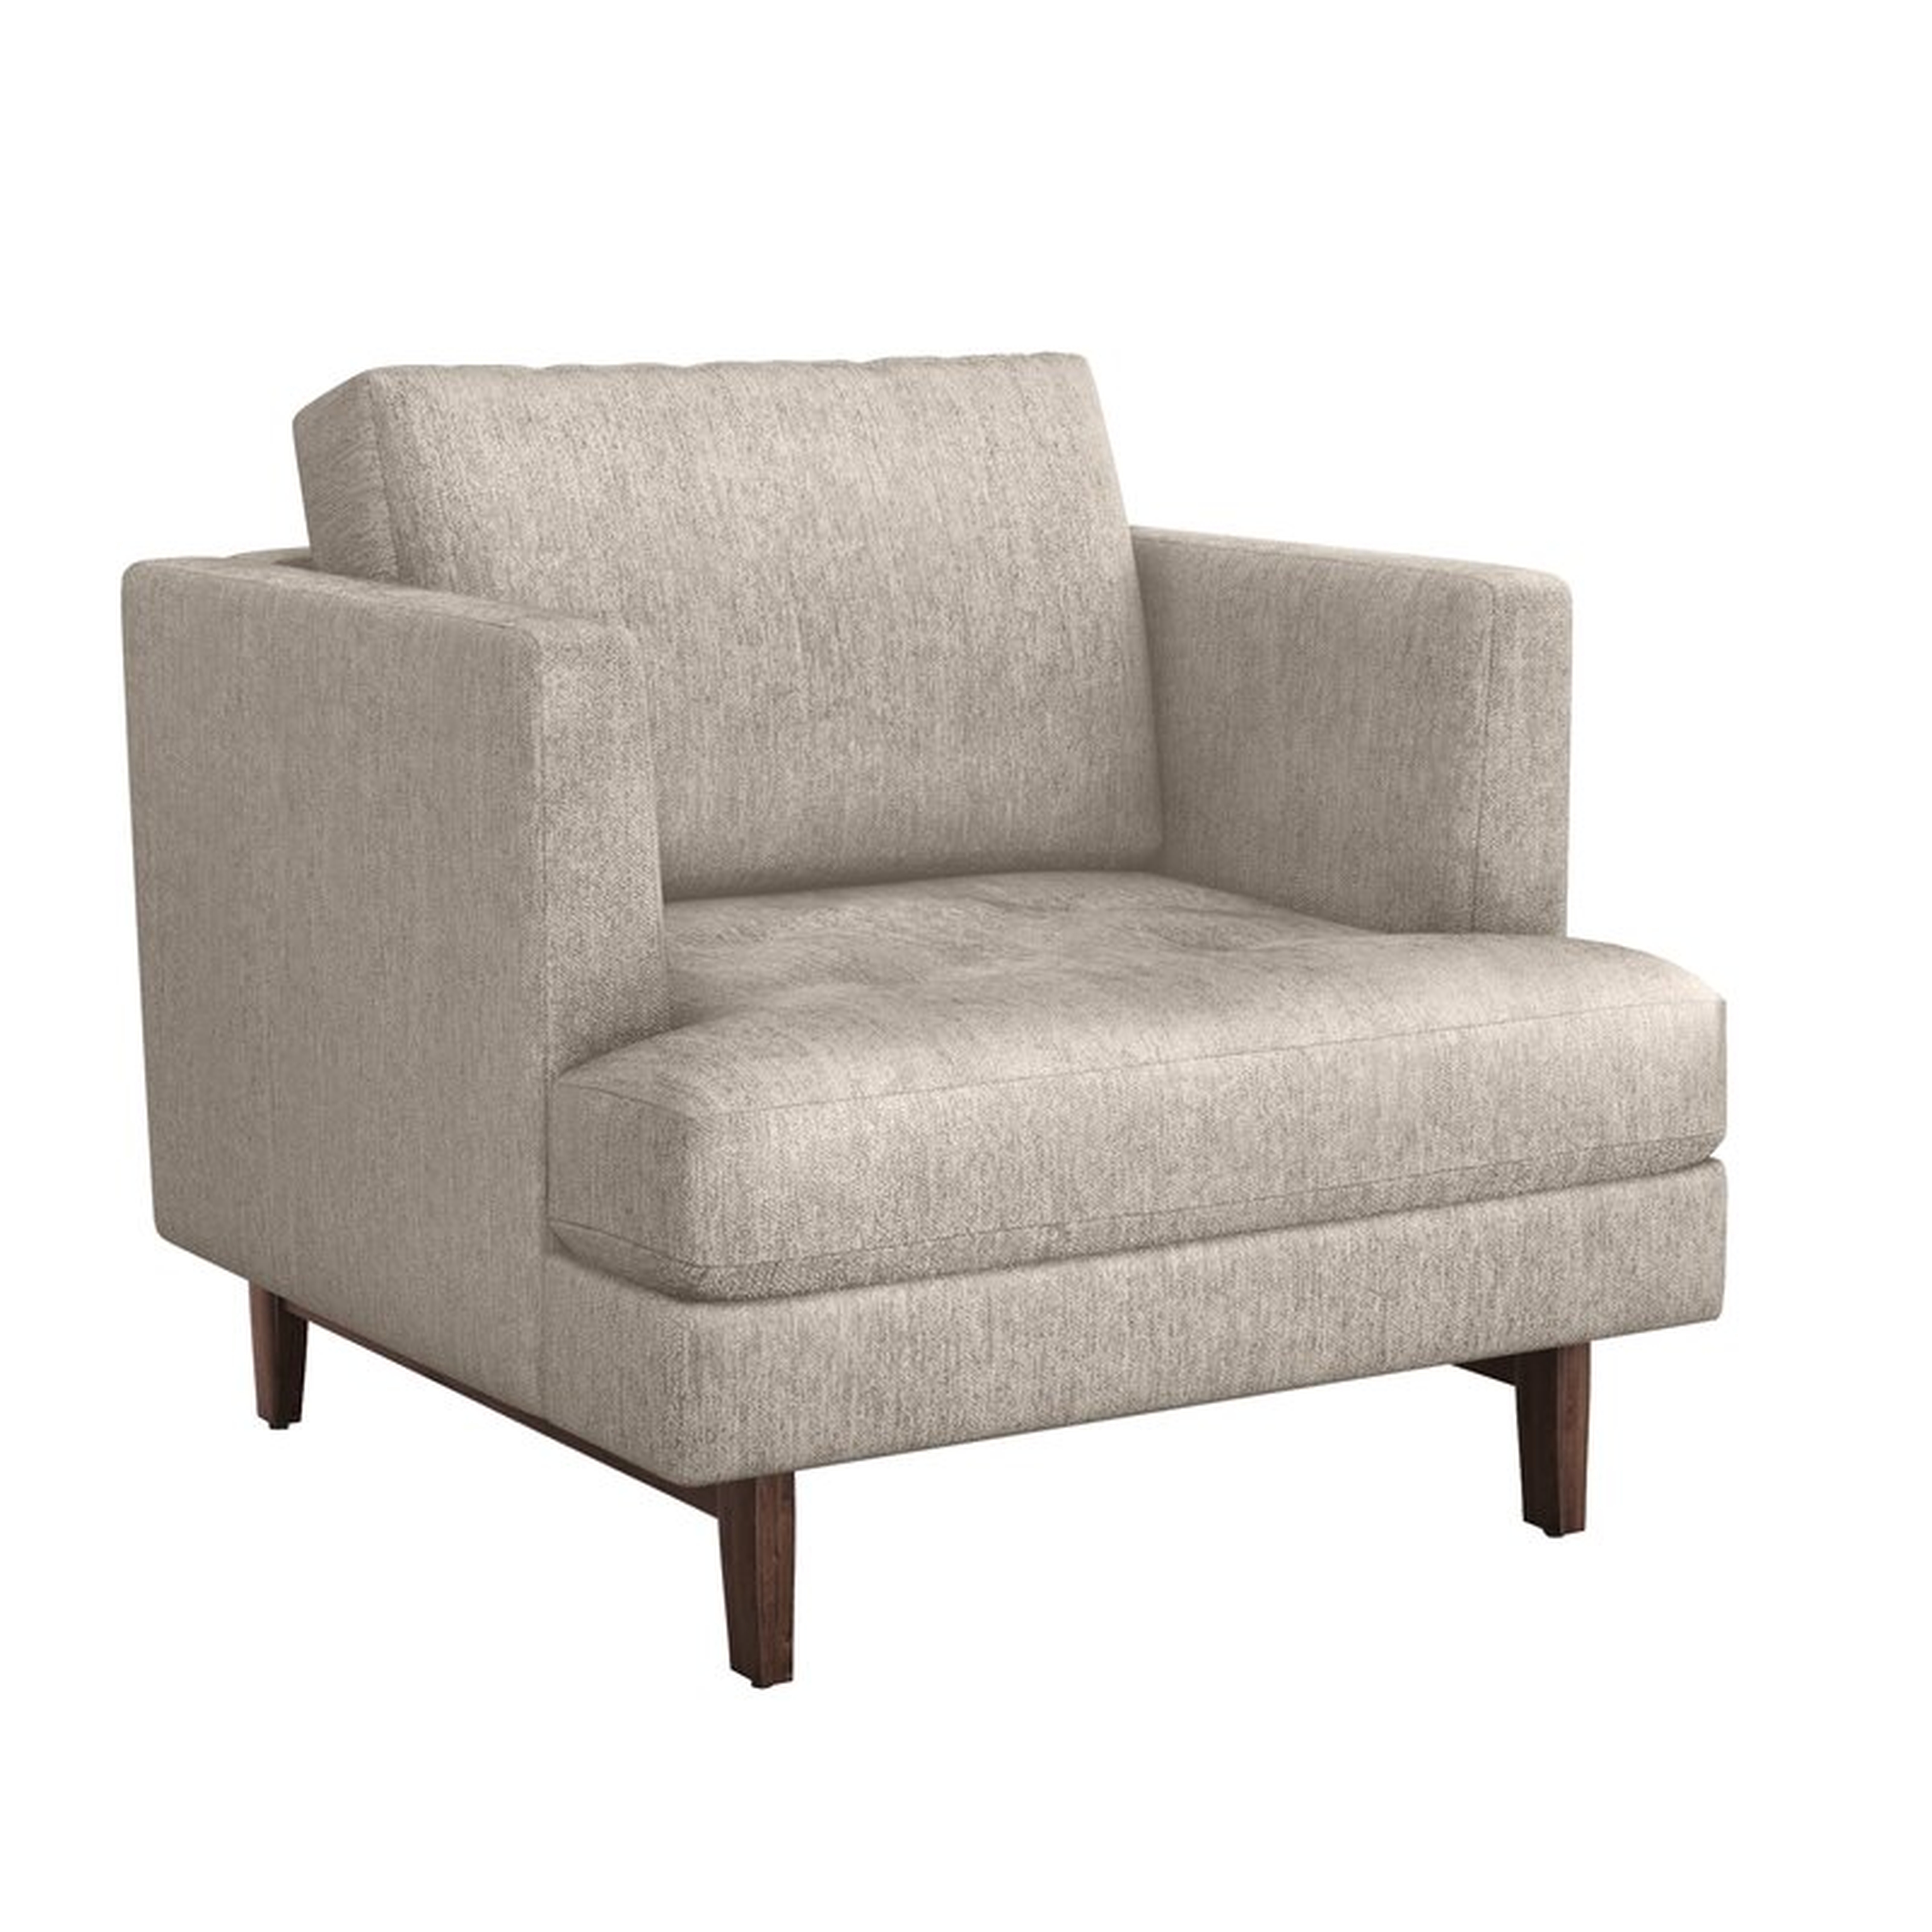 Interlude Ayler Lounge Chair Upholstery Color: Bungalow - Perigold